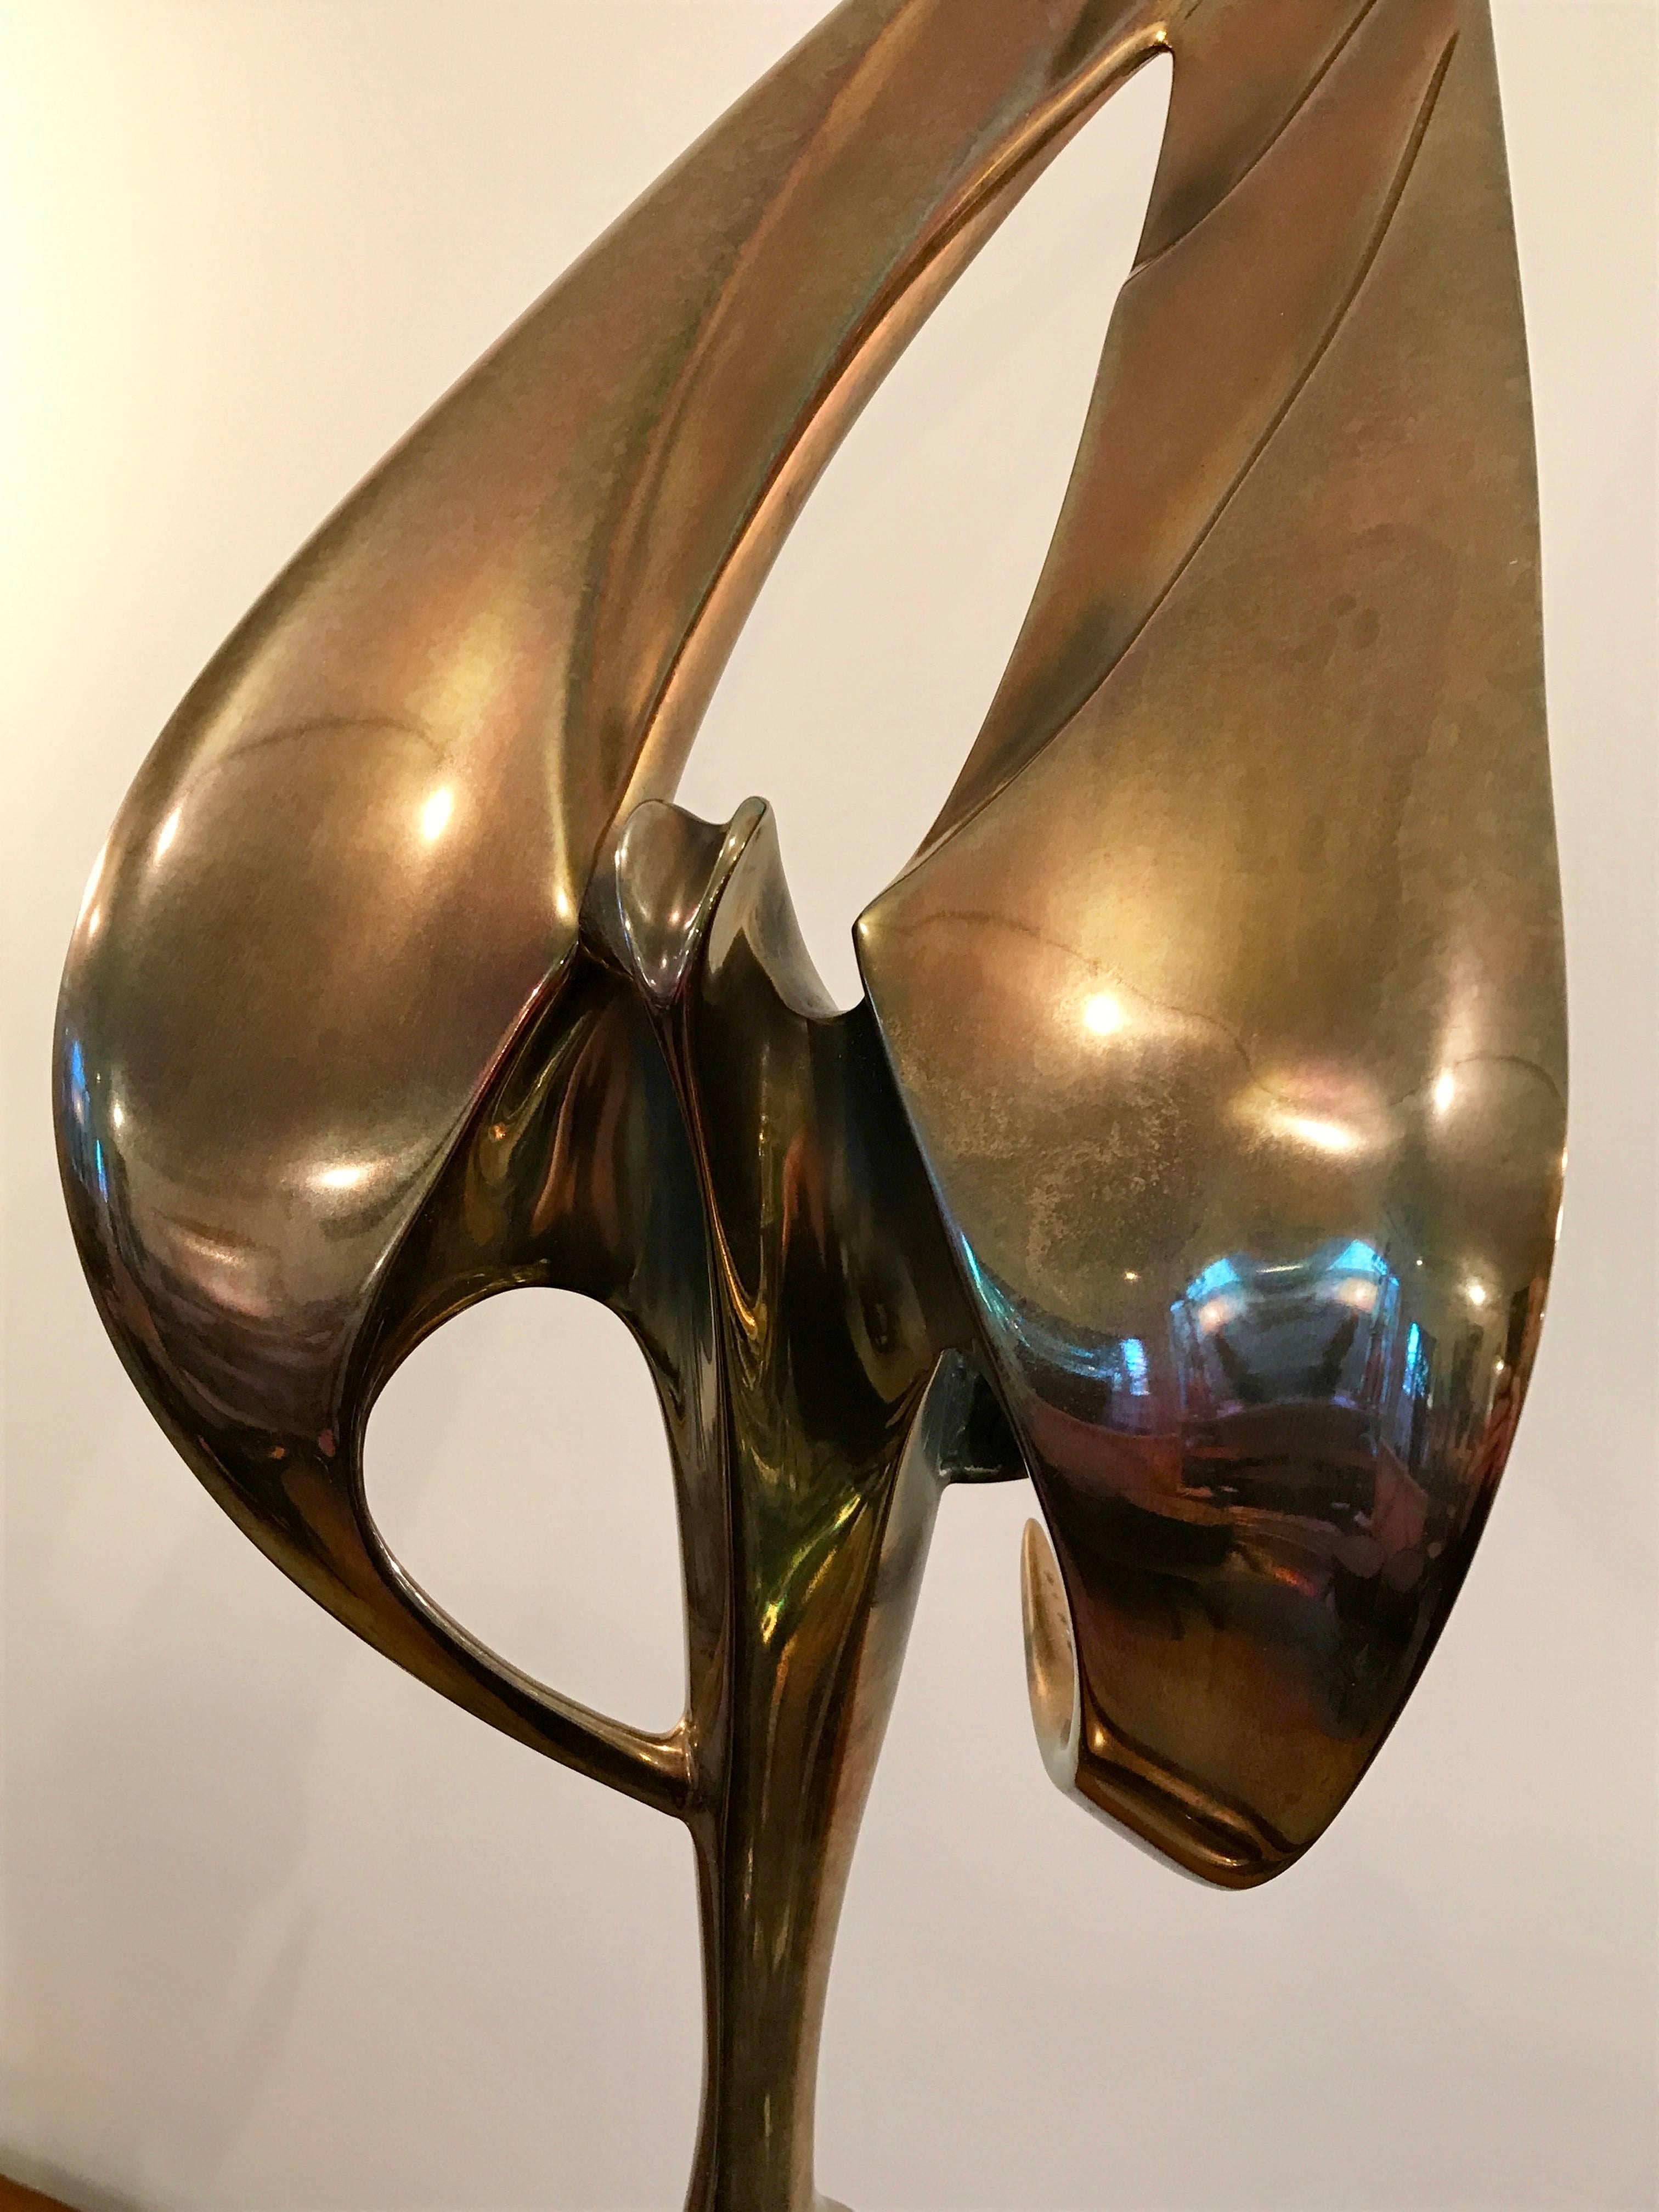 Beautiful highly polished bronze bird perched on a bronze patina rock formation. Titled Birds of Prey. Limited edition 7/50. 

Growing up in Roseville, California, the Bennett brothers began their art career in 1969. They started in an